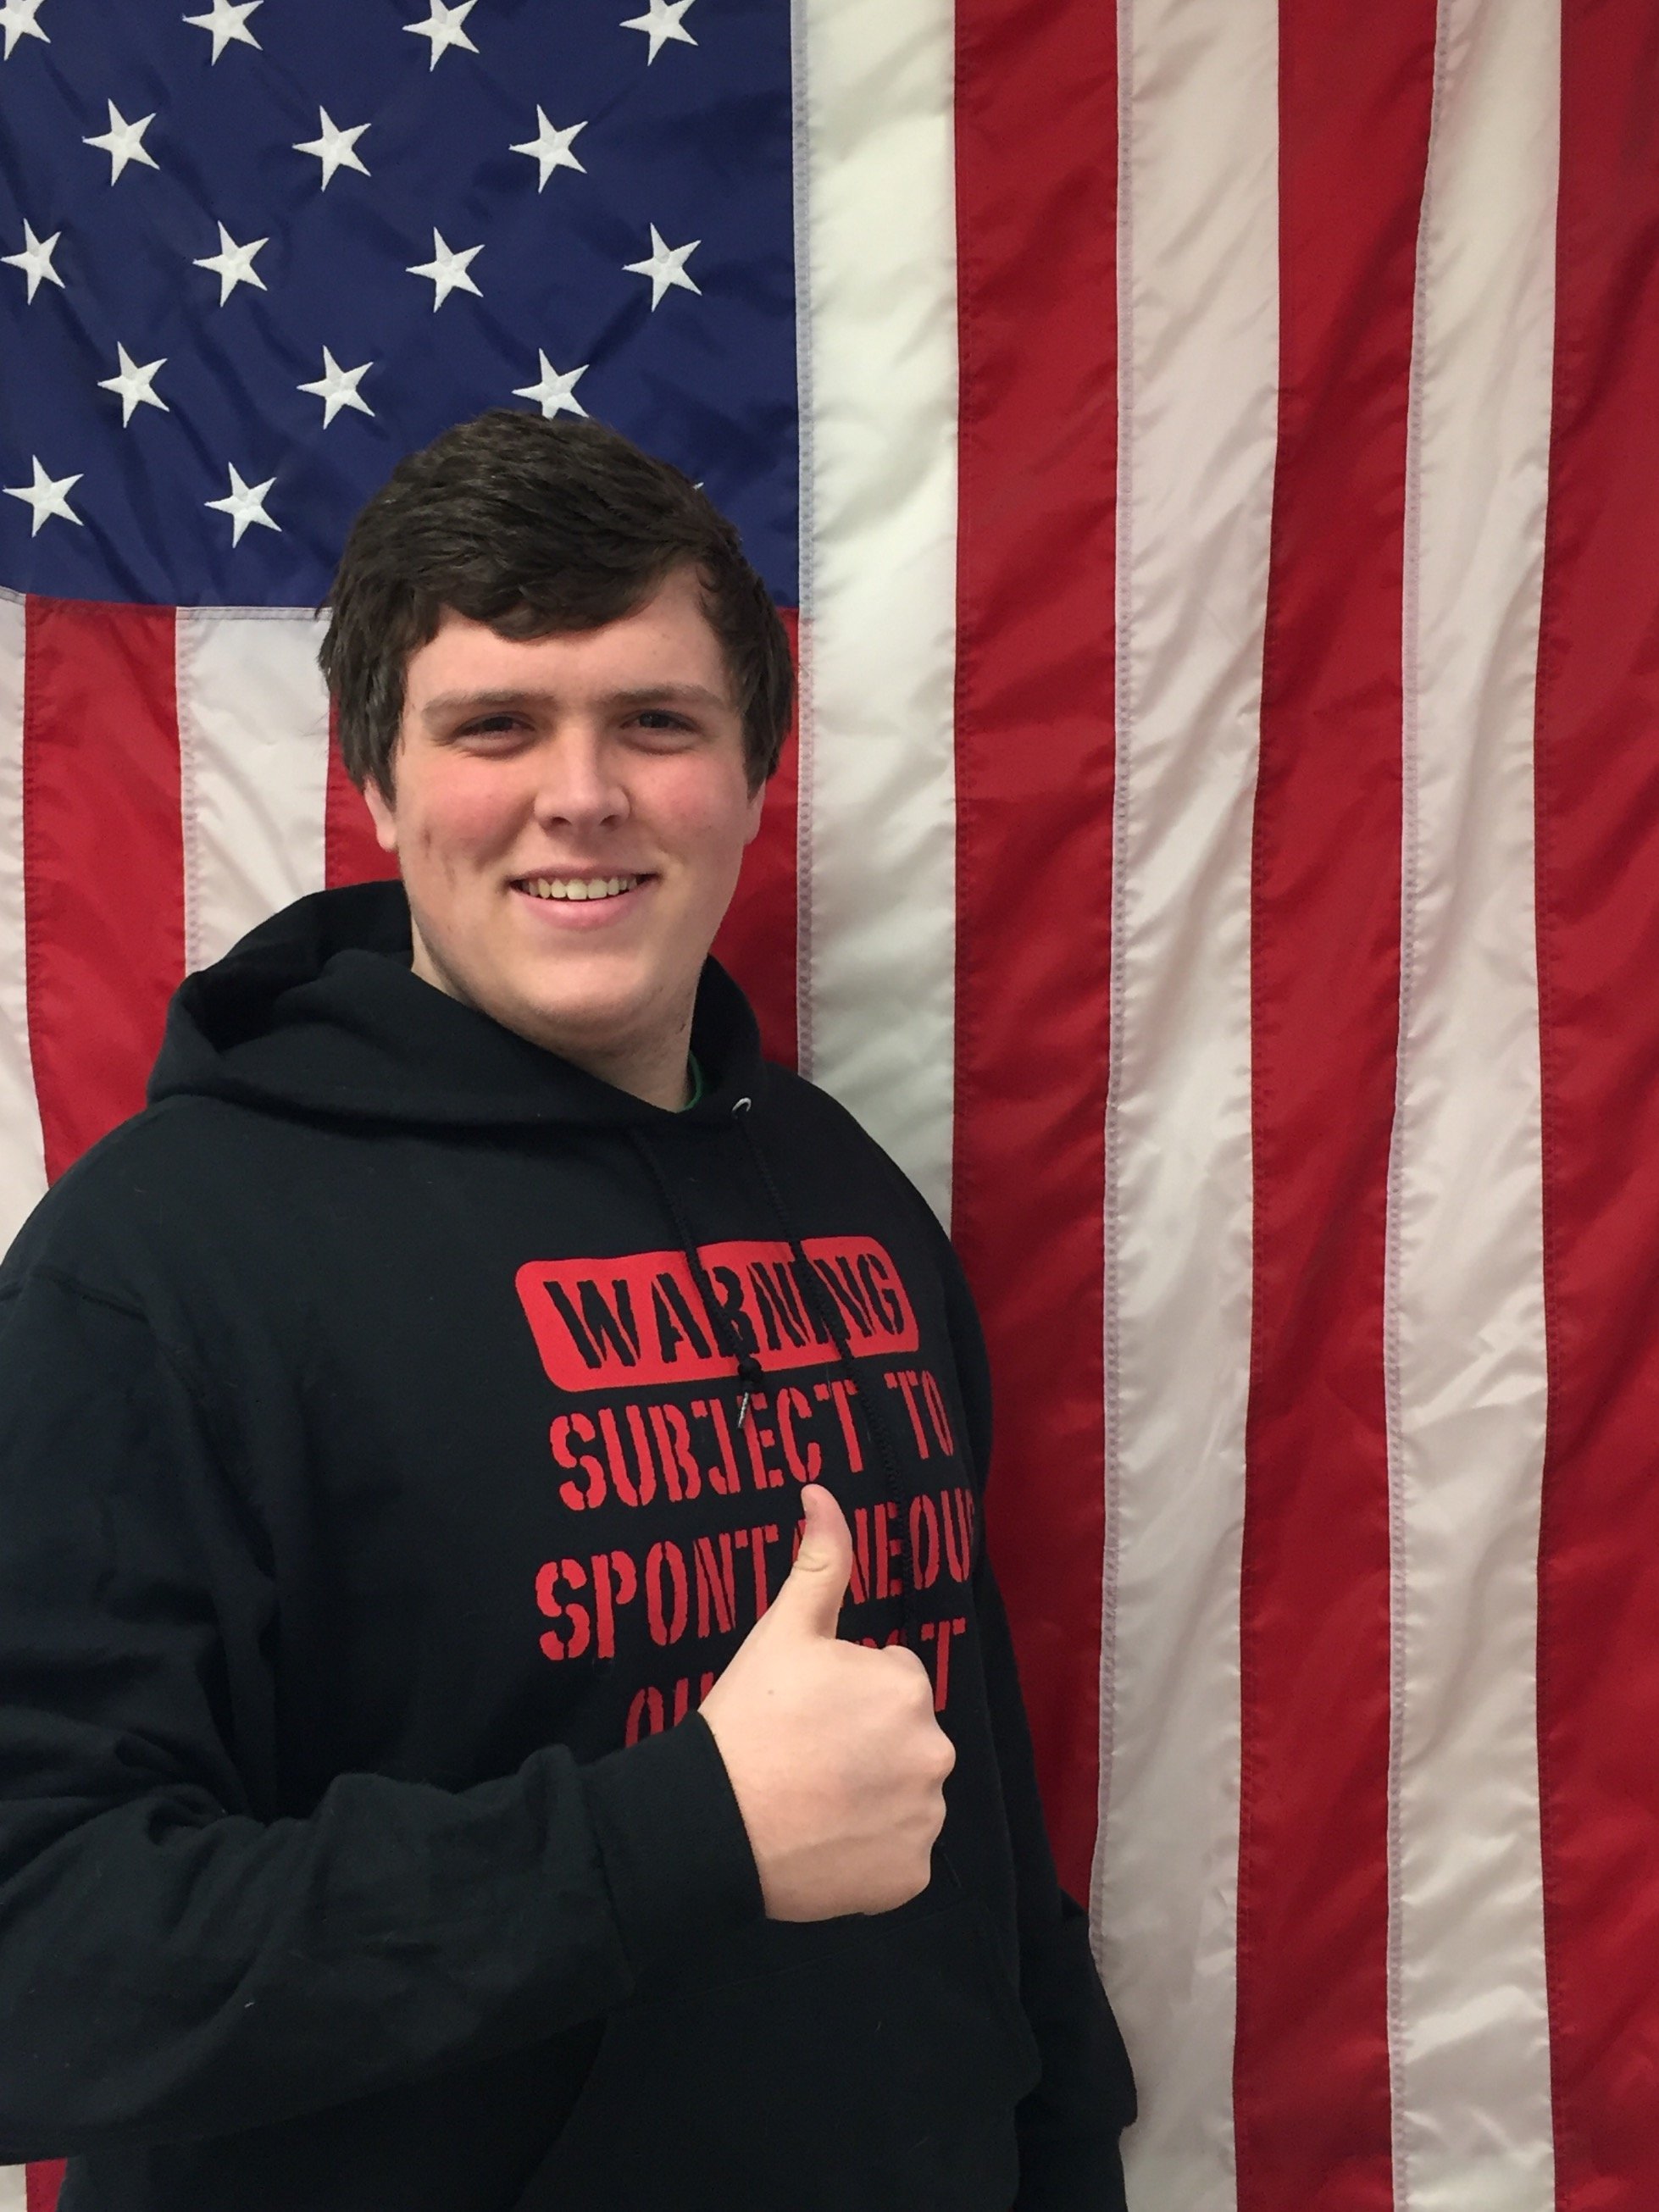 2018 Candidate for Maryville High School, First Hour Honors AMERICAN Government President
If Weaver CAN, ameriCAN🇺🇸